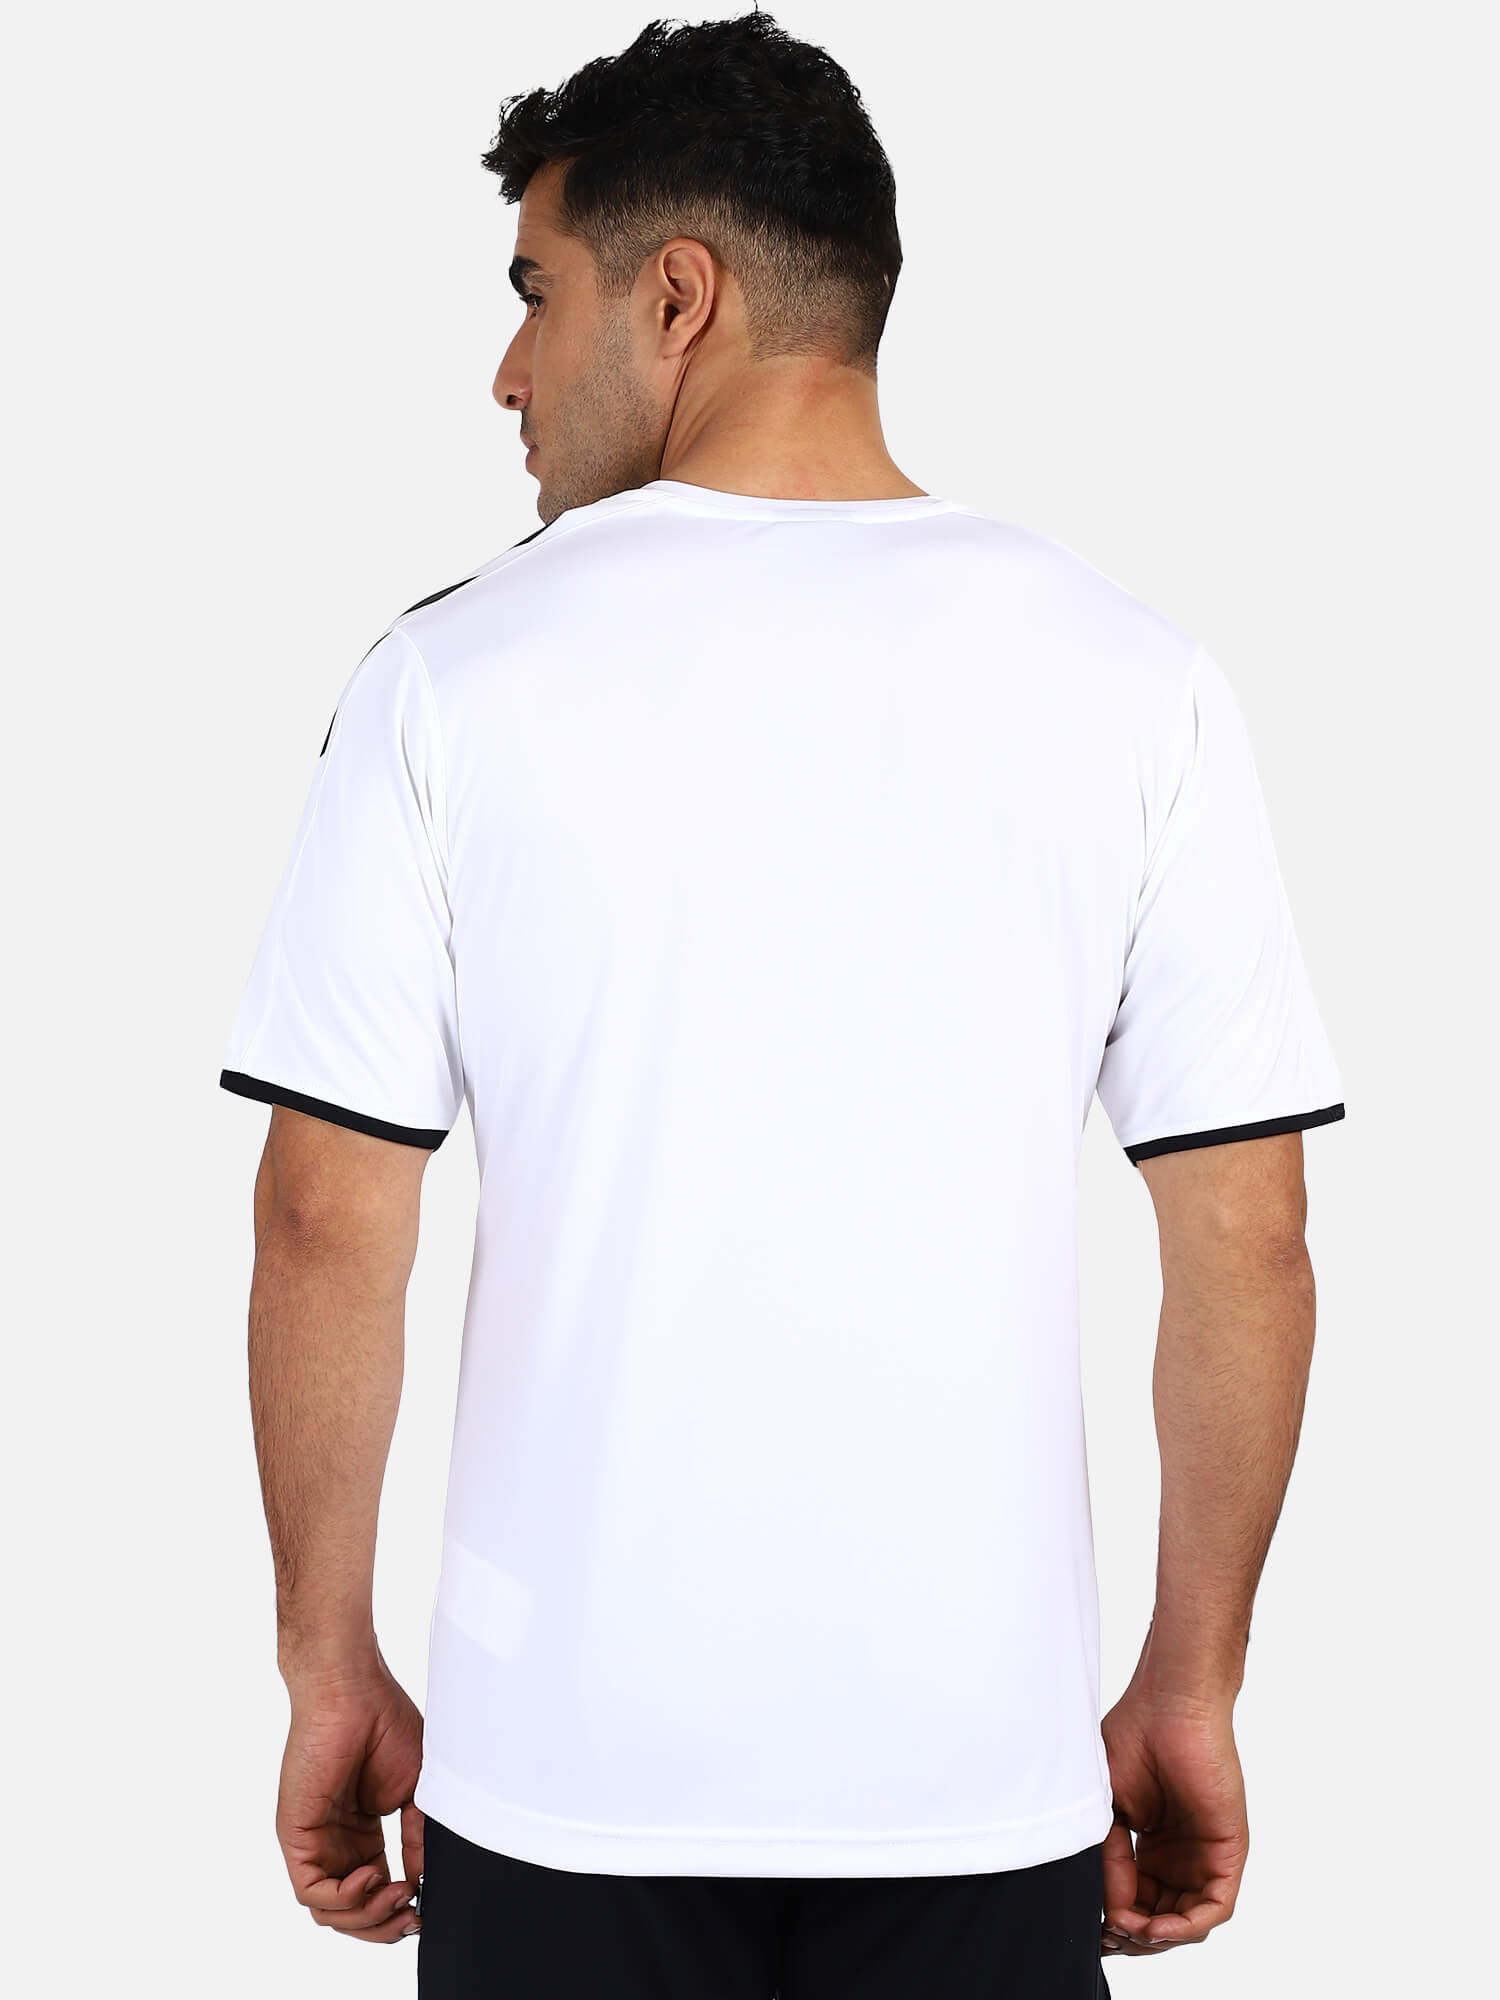 Core Poly White Jersey for Unisex